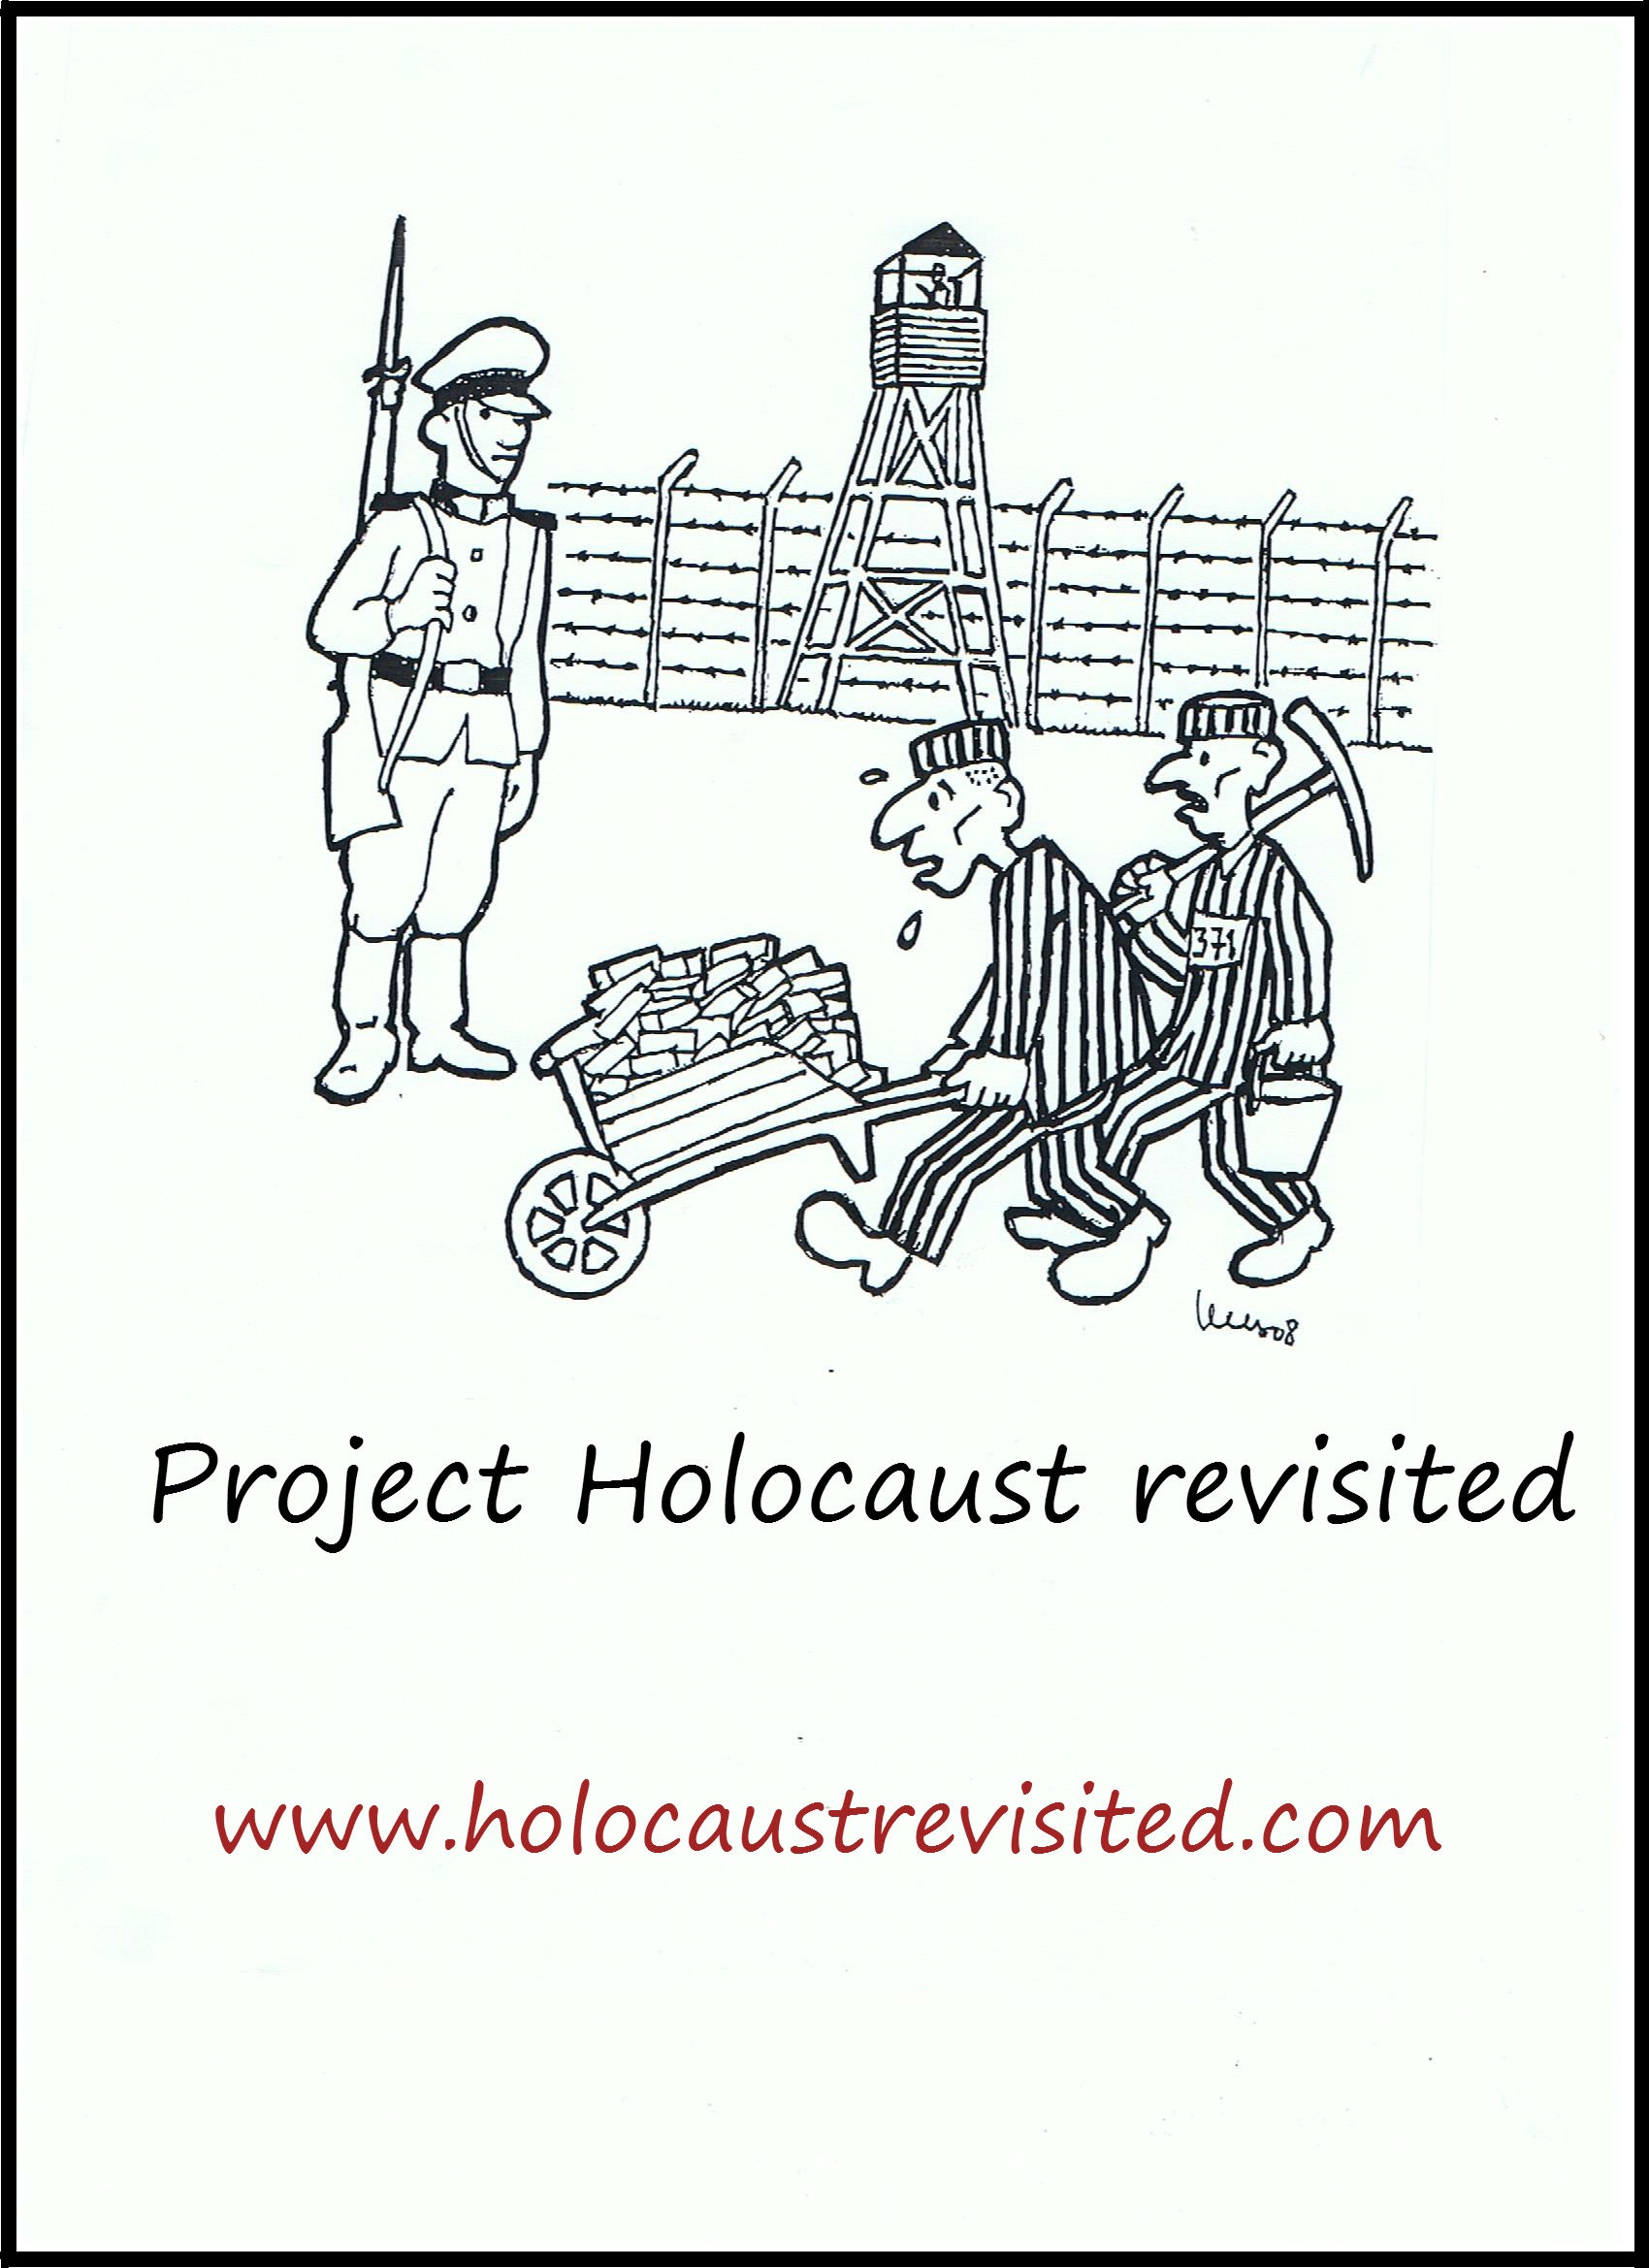 HolocaustRevisited